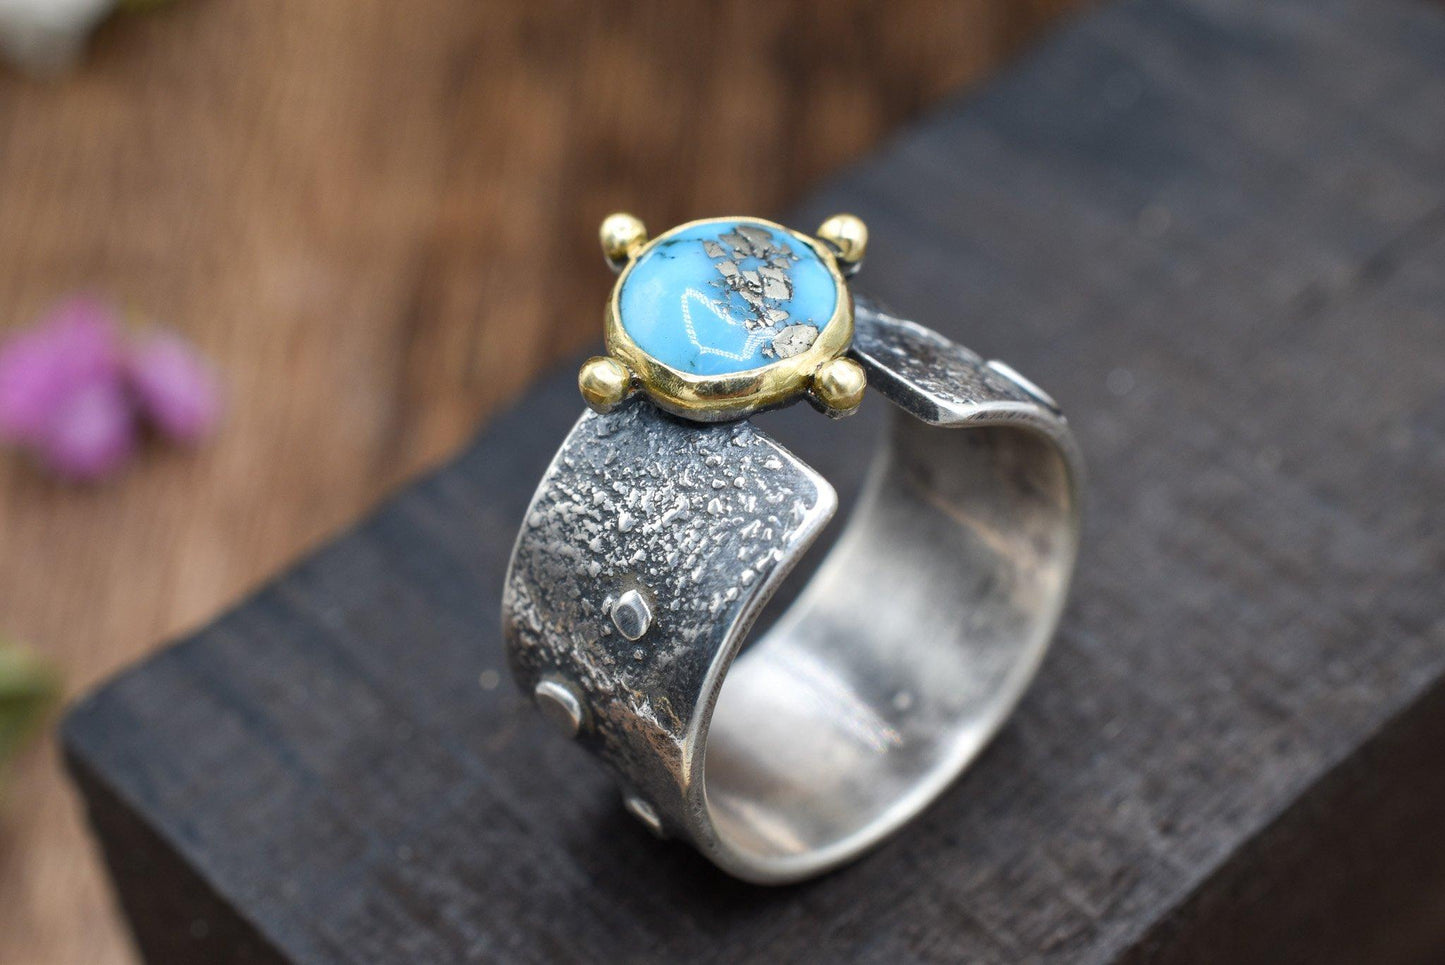 18k Gold, Turquoise "Canyon" Ring, Mixed Metals - Size 7.5